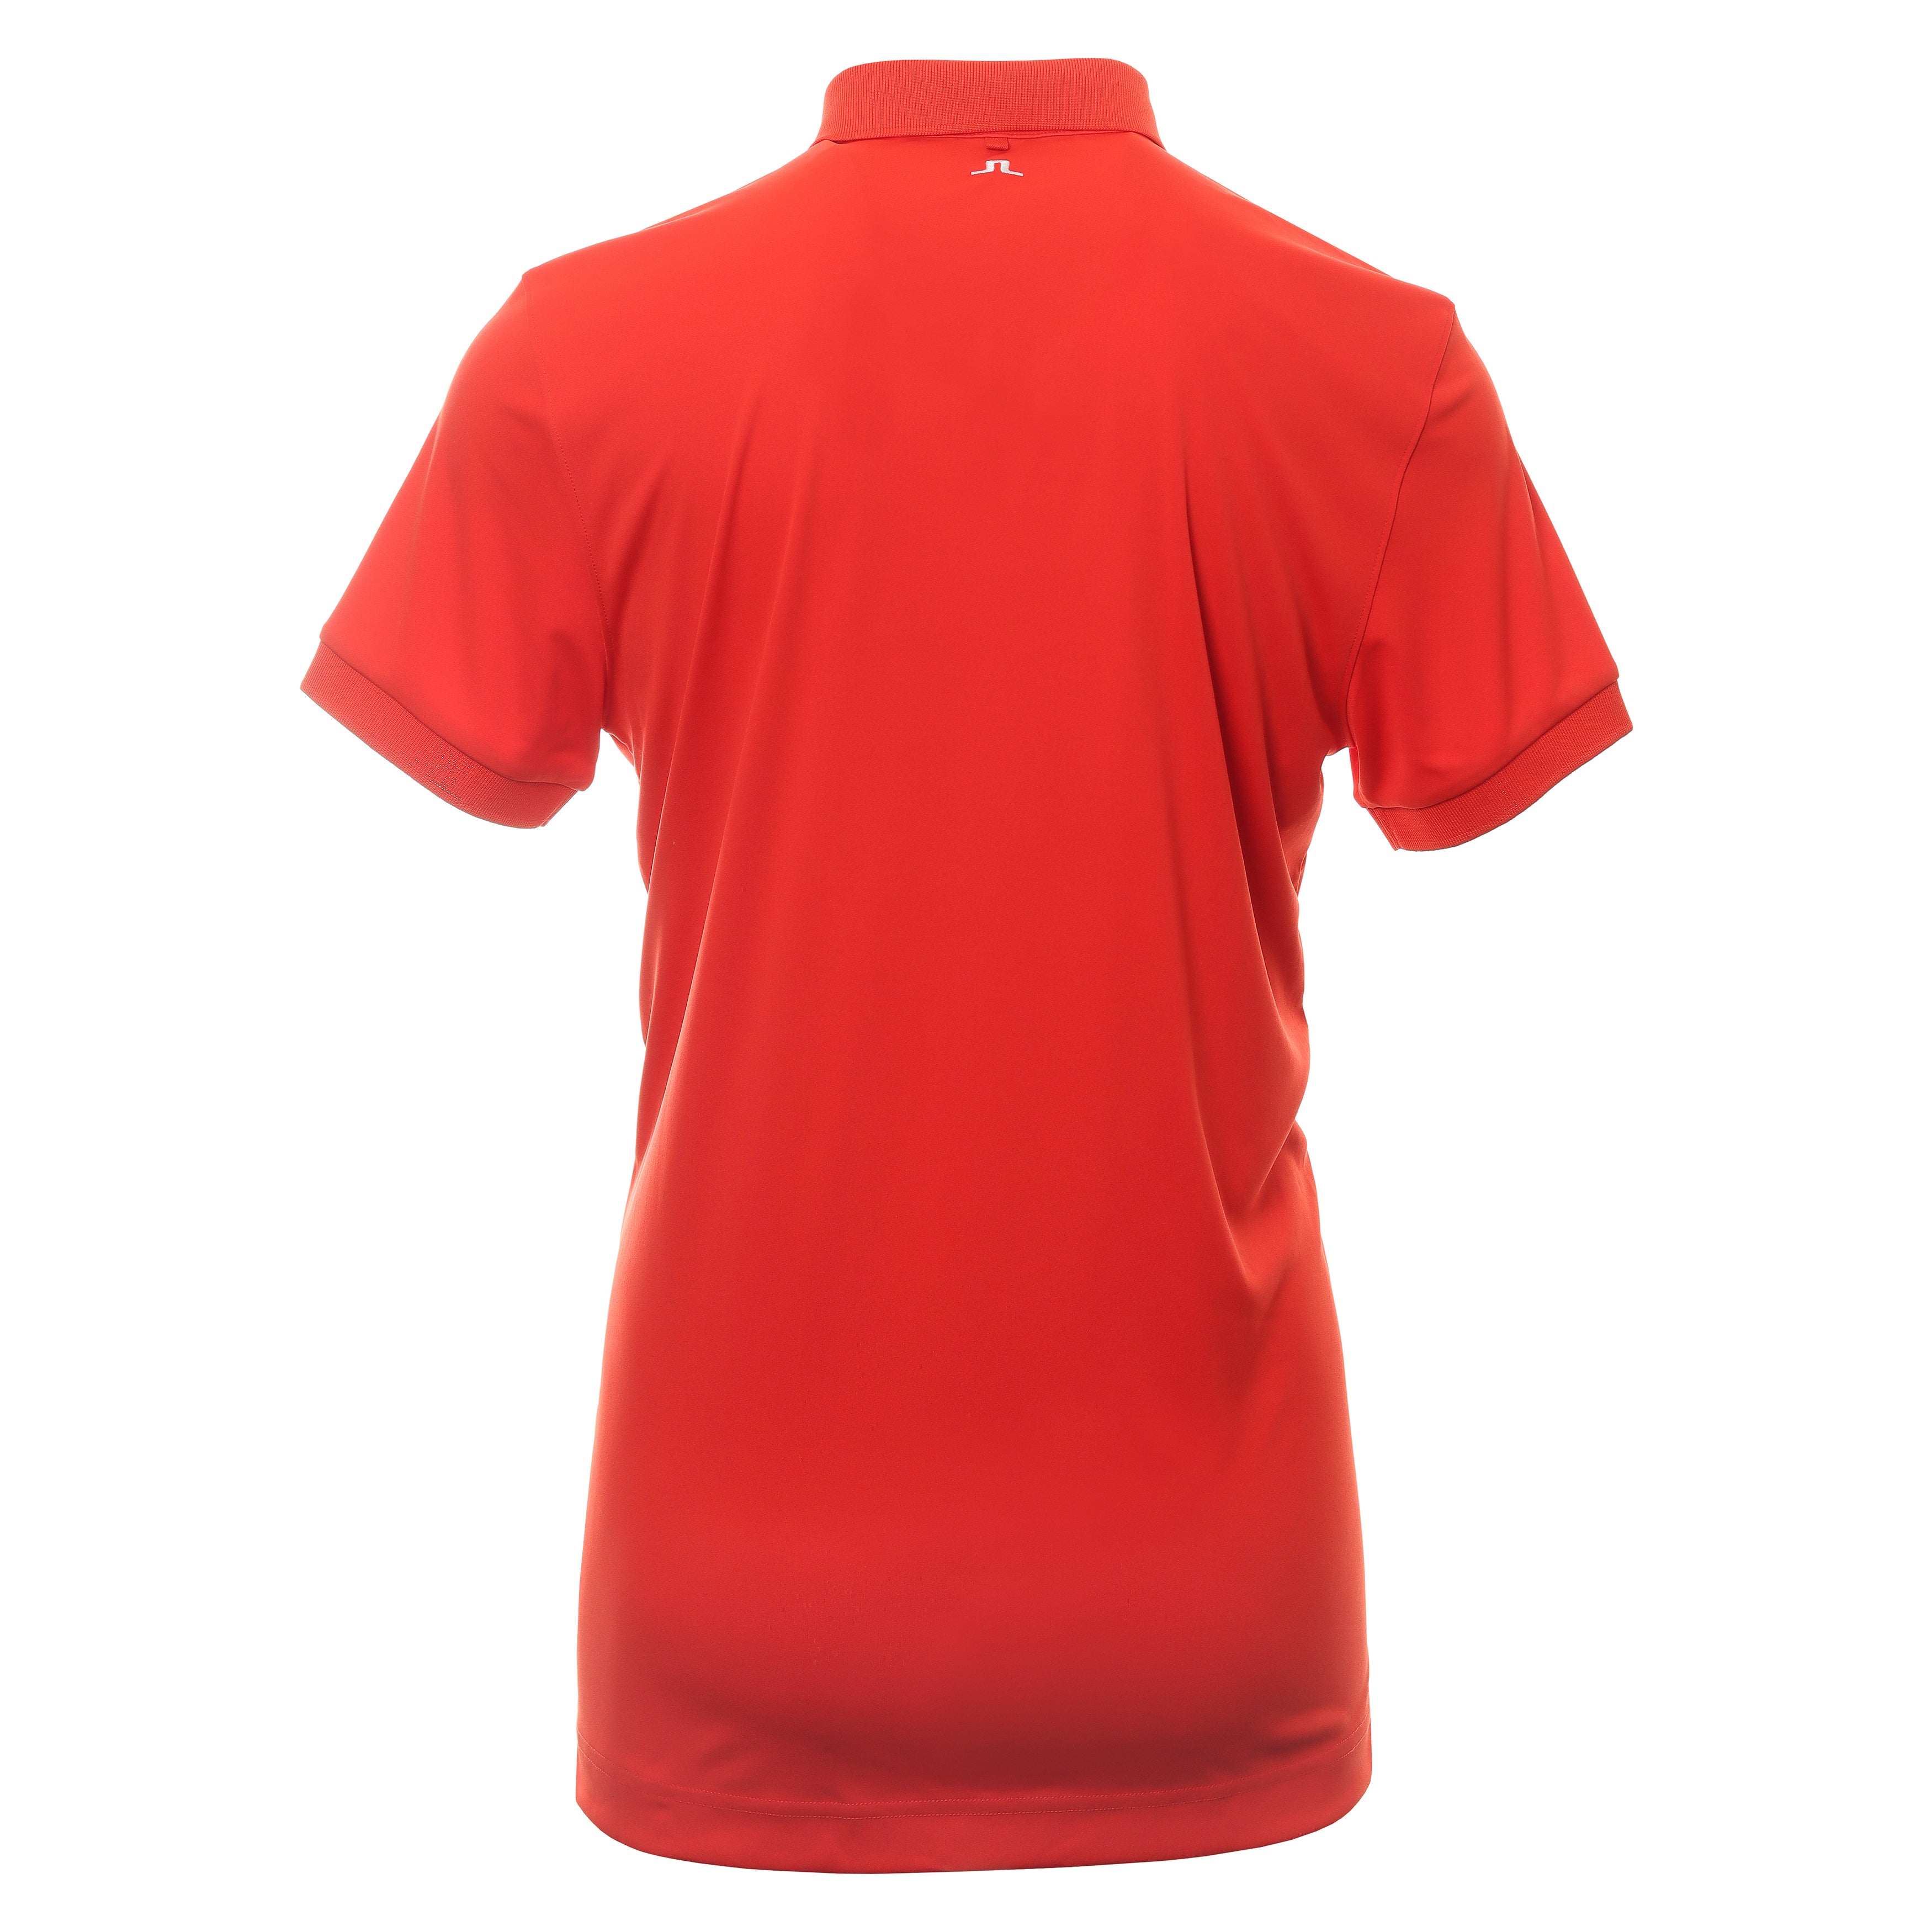 J.Lindeberg Golf Tour Tech Polo Shirt GMJT08836 Fiery Red G135 | Function18